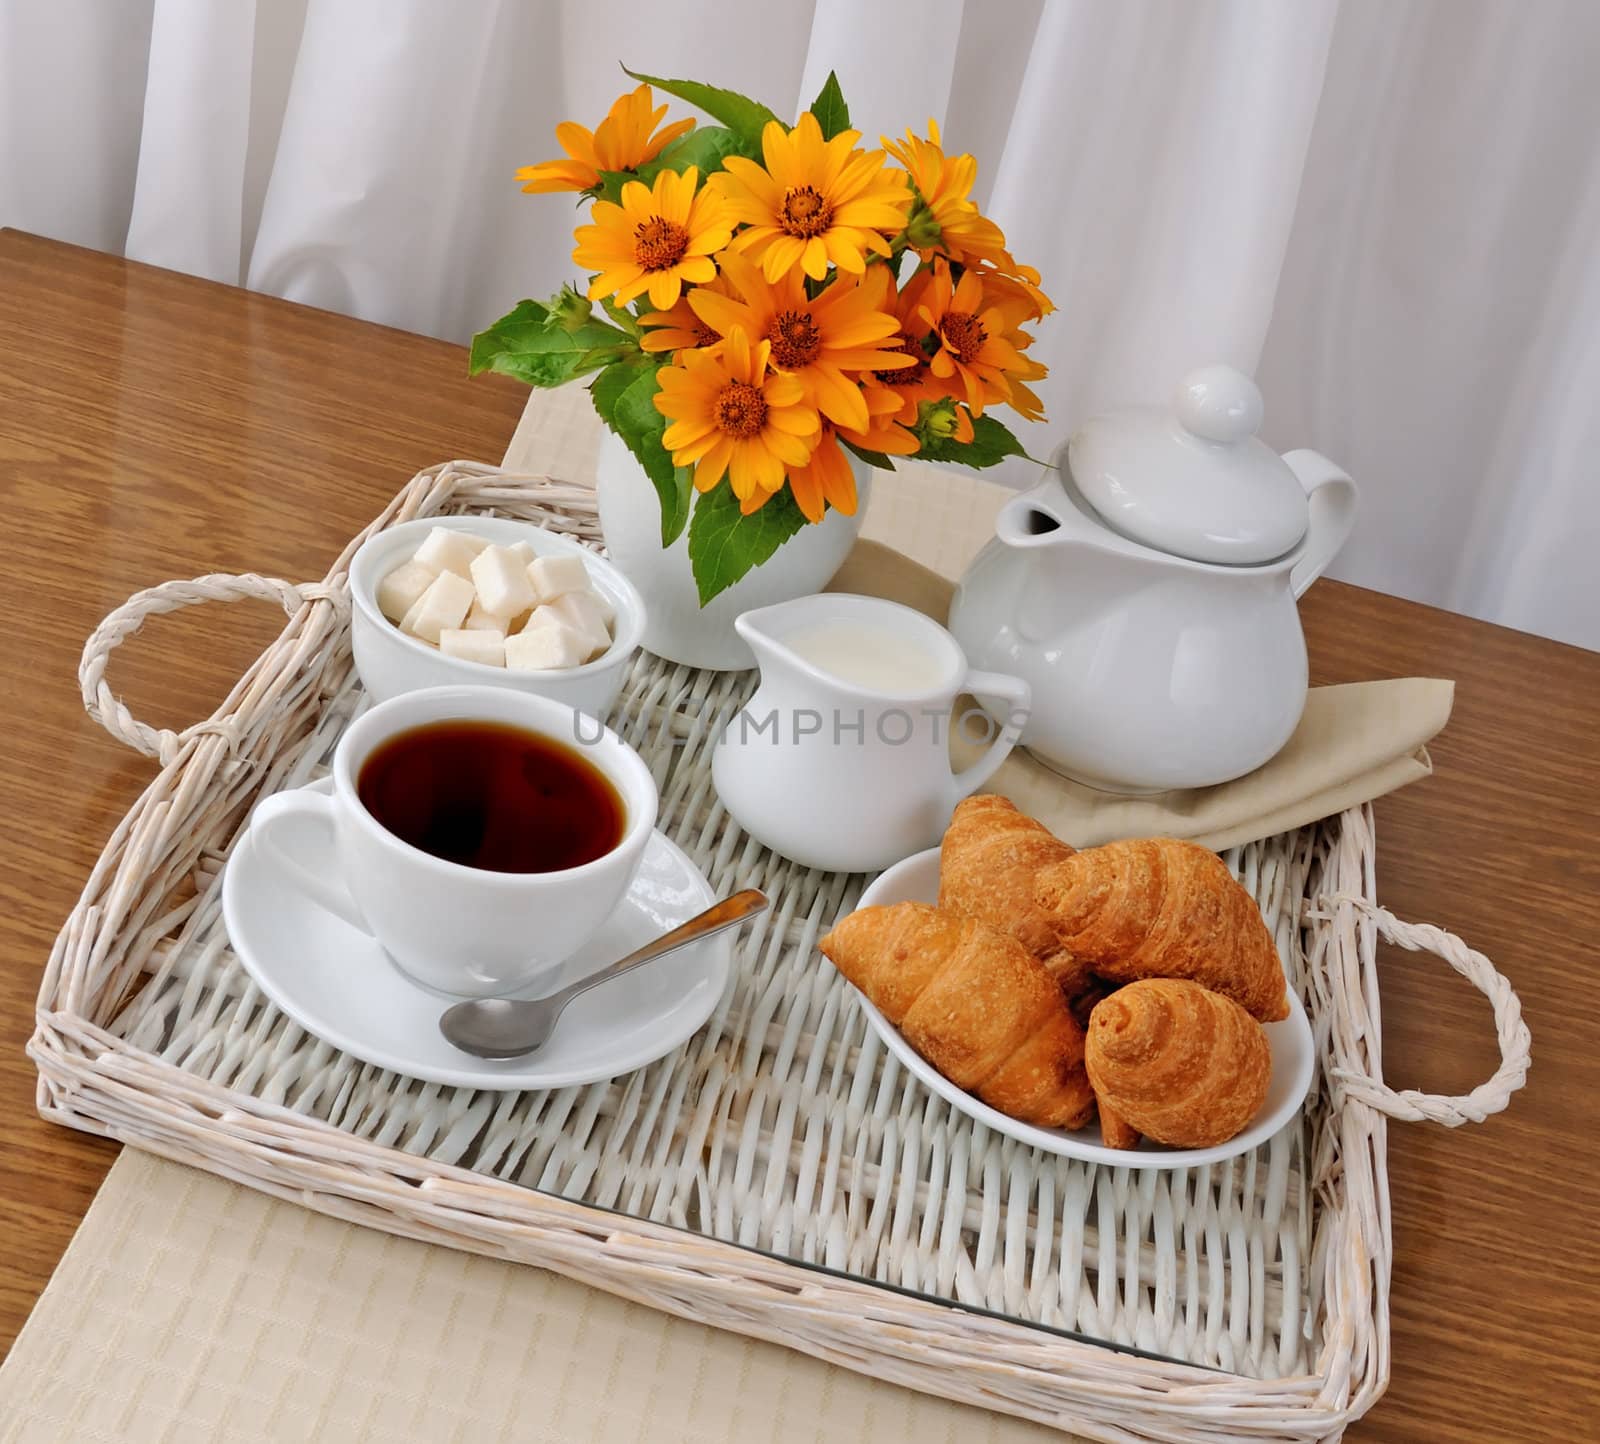 Breakfast with croissants with tea and milk on a tray